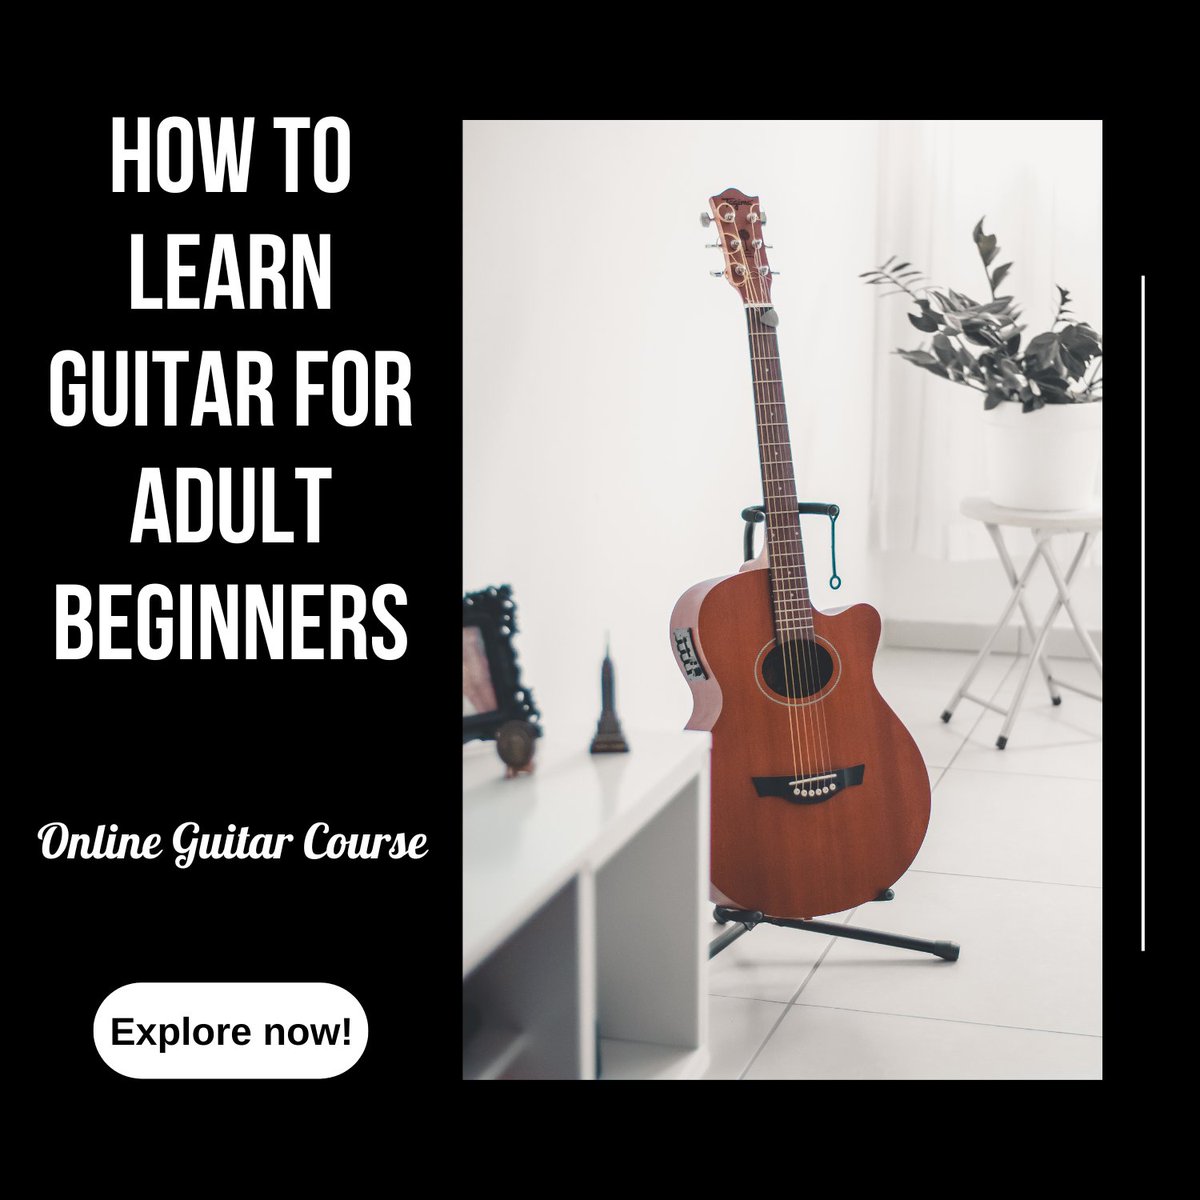 How to learn guitar for adult beginners - Online guitar course wallartsizeguide.com/blog/ds/how-to… #guitar #course #learn #HowTo